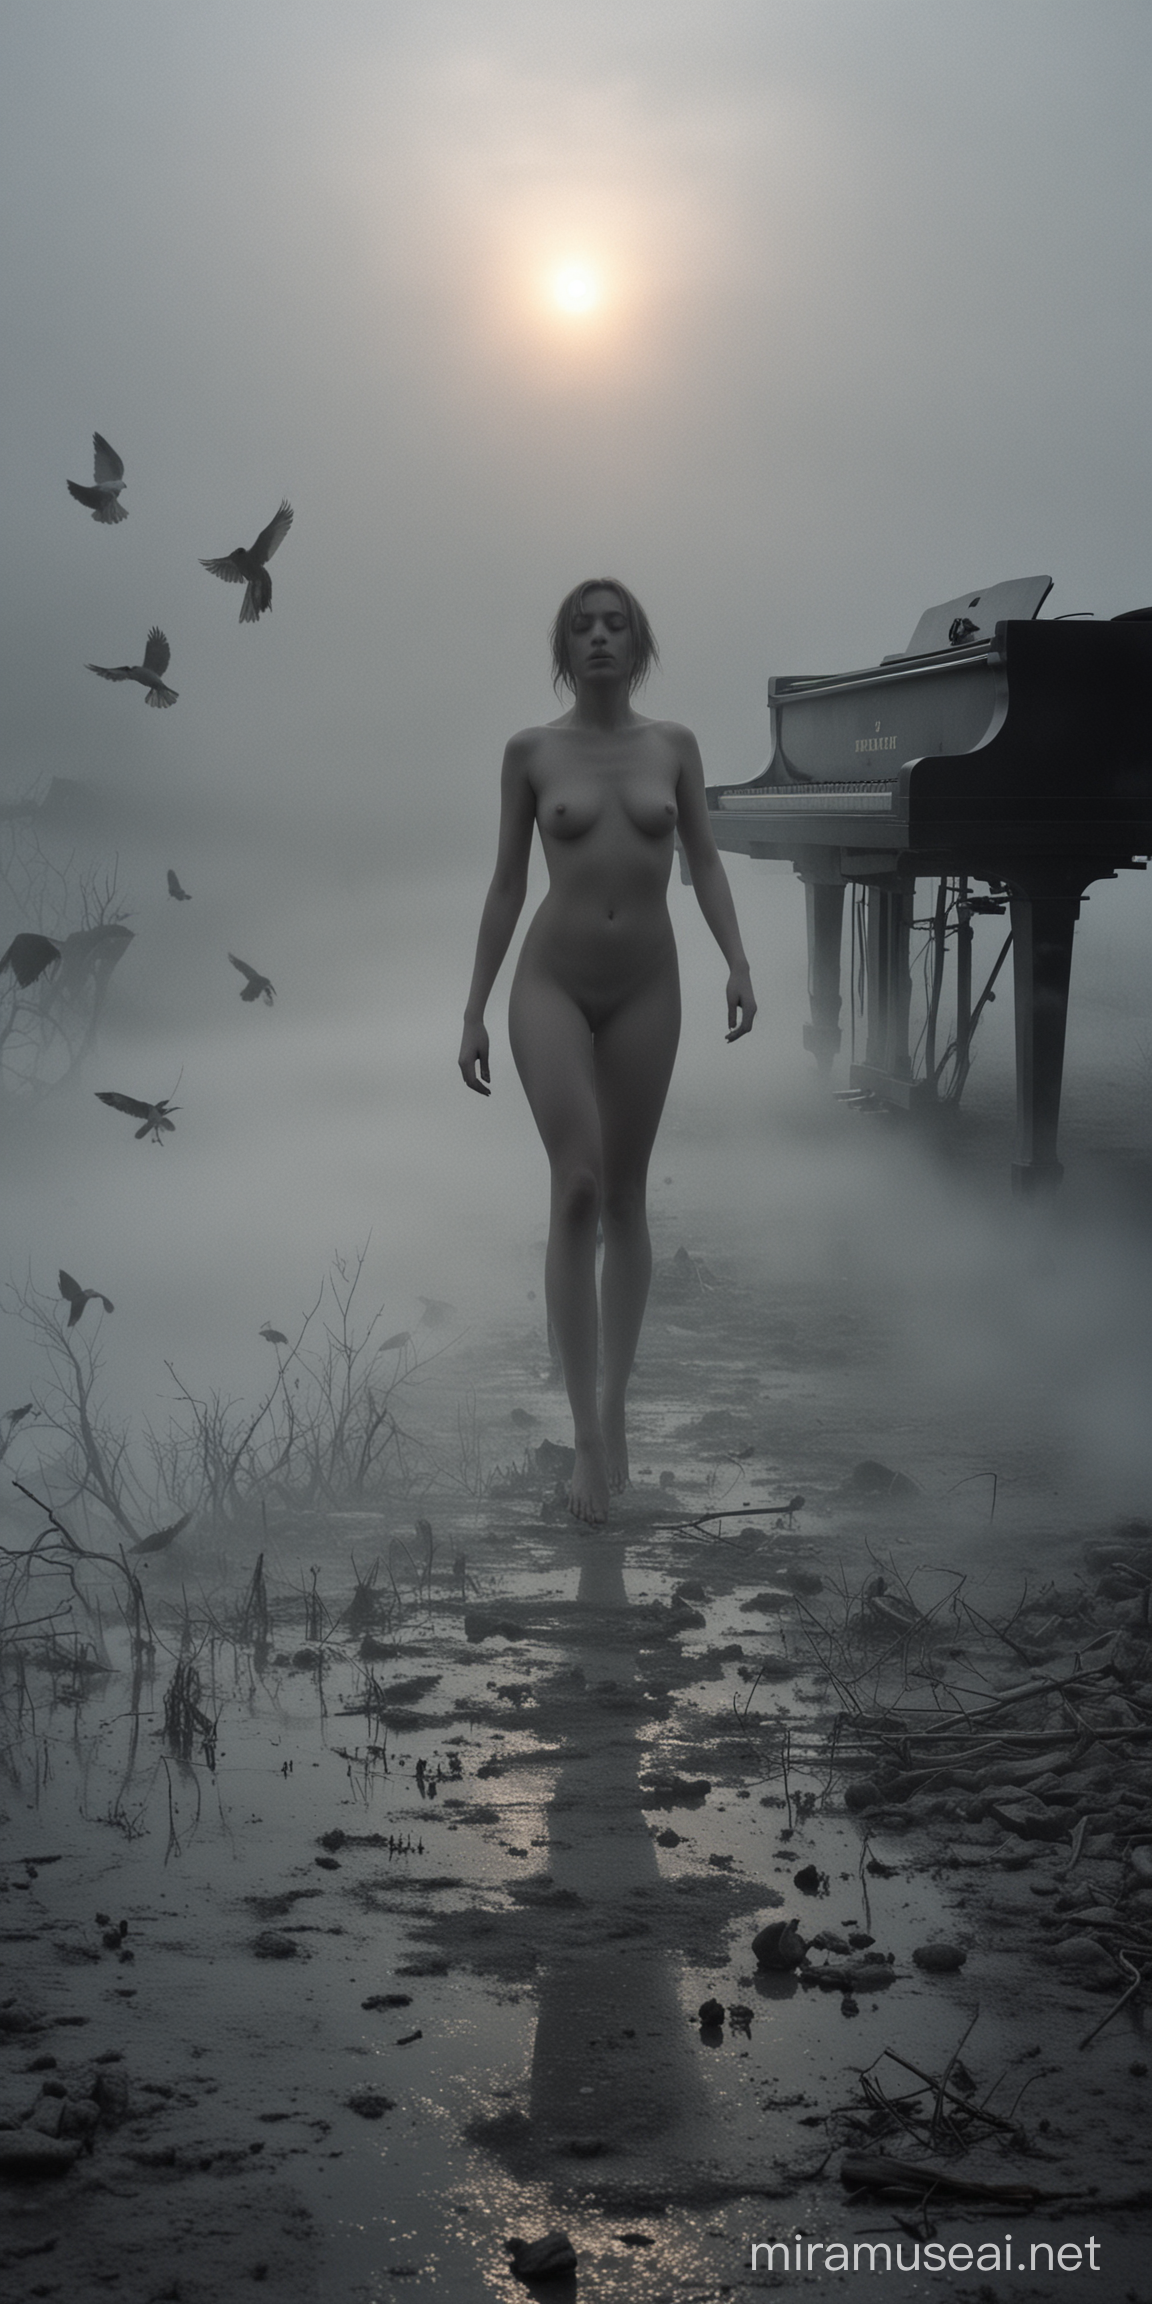 Dystopian Realism Nude Woman Playing Piano in Misty Transylvanian Landscape